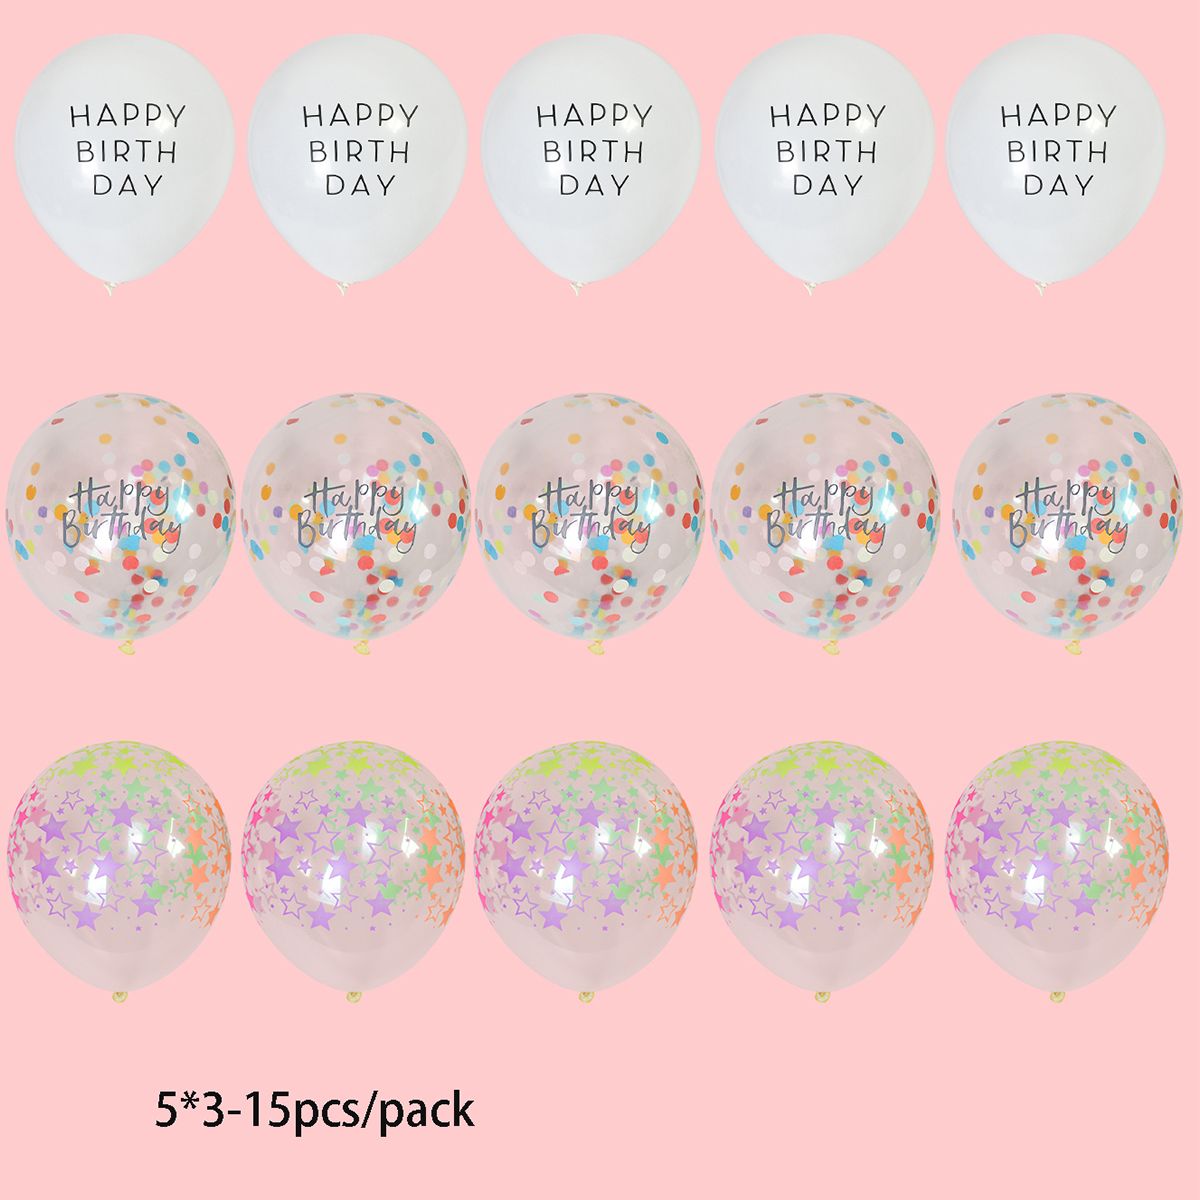 15-pack Happy Birthday Balloons Decor Colorful Dots Stars Letter Latex Balloons Birthday Party Suppl